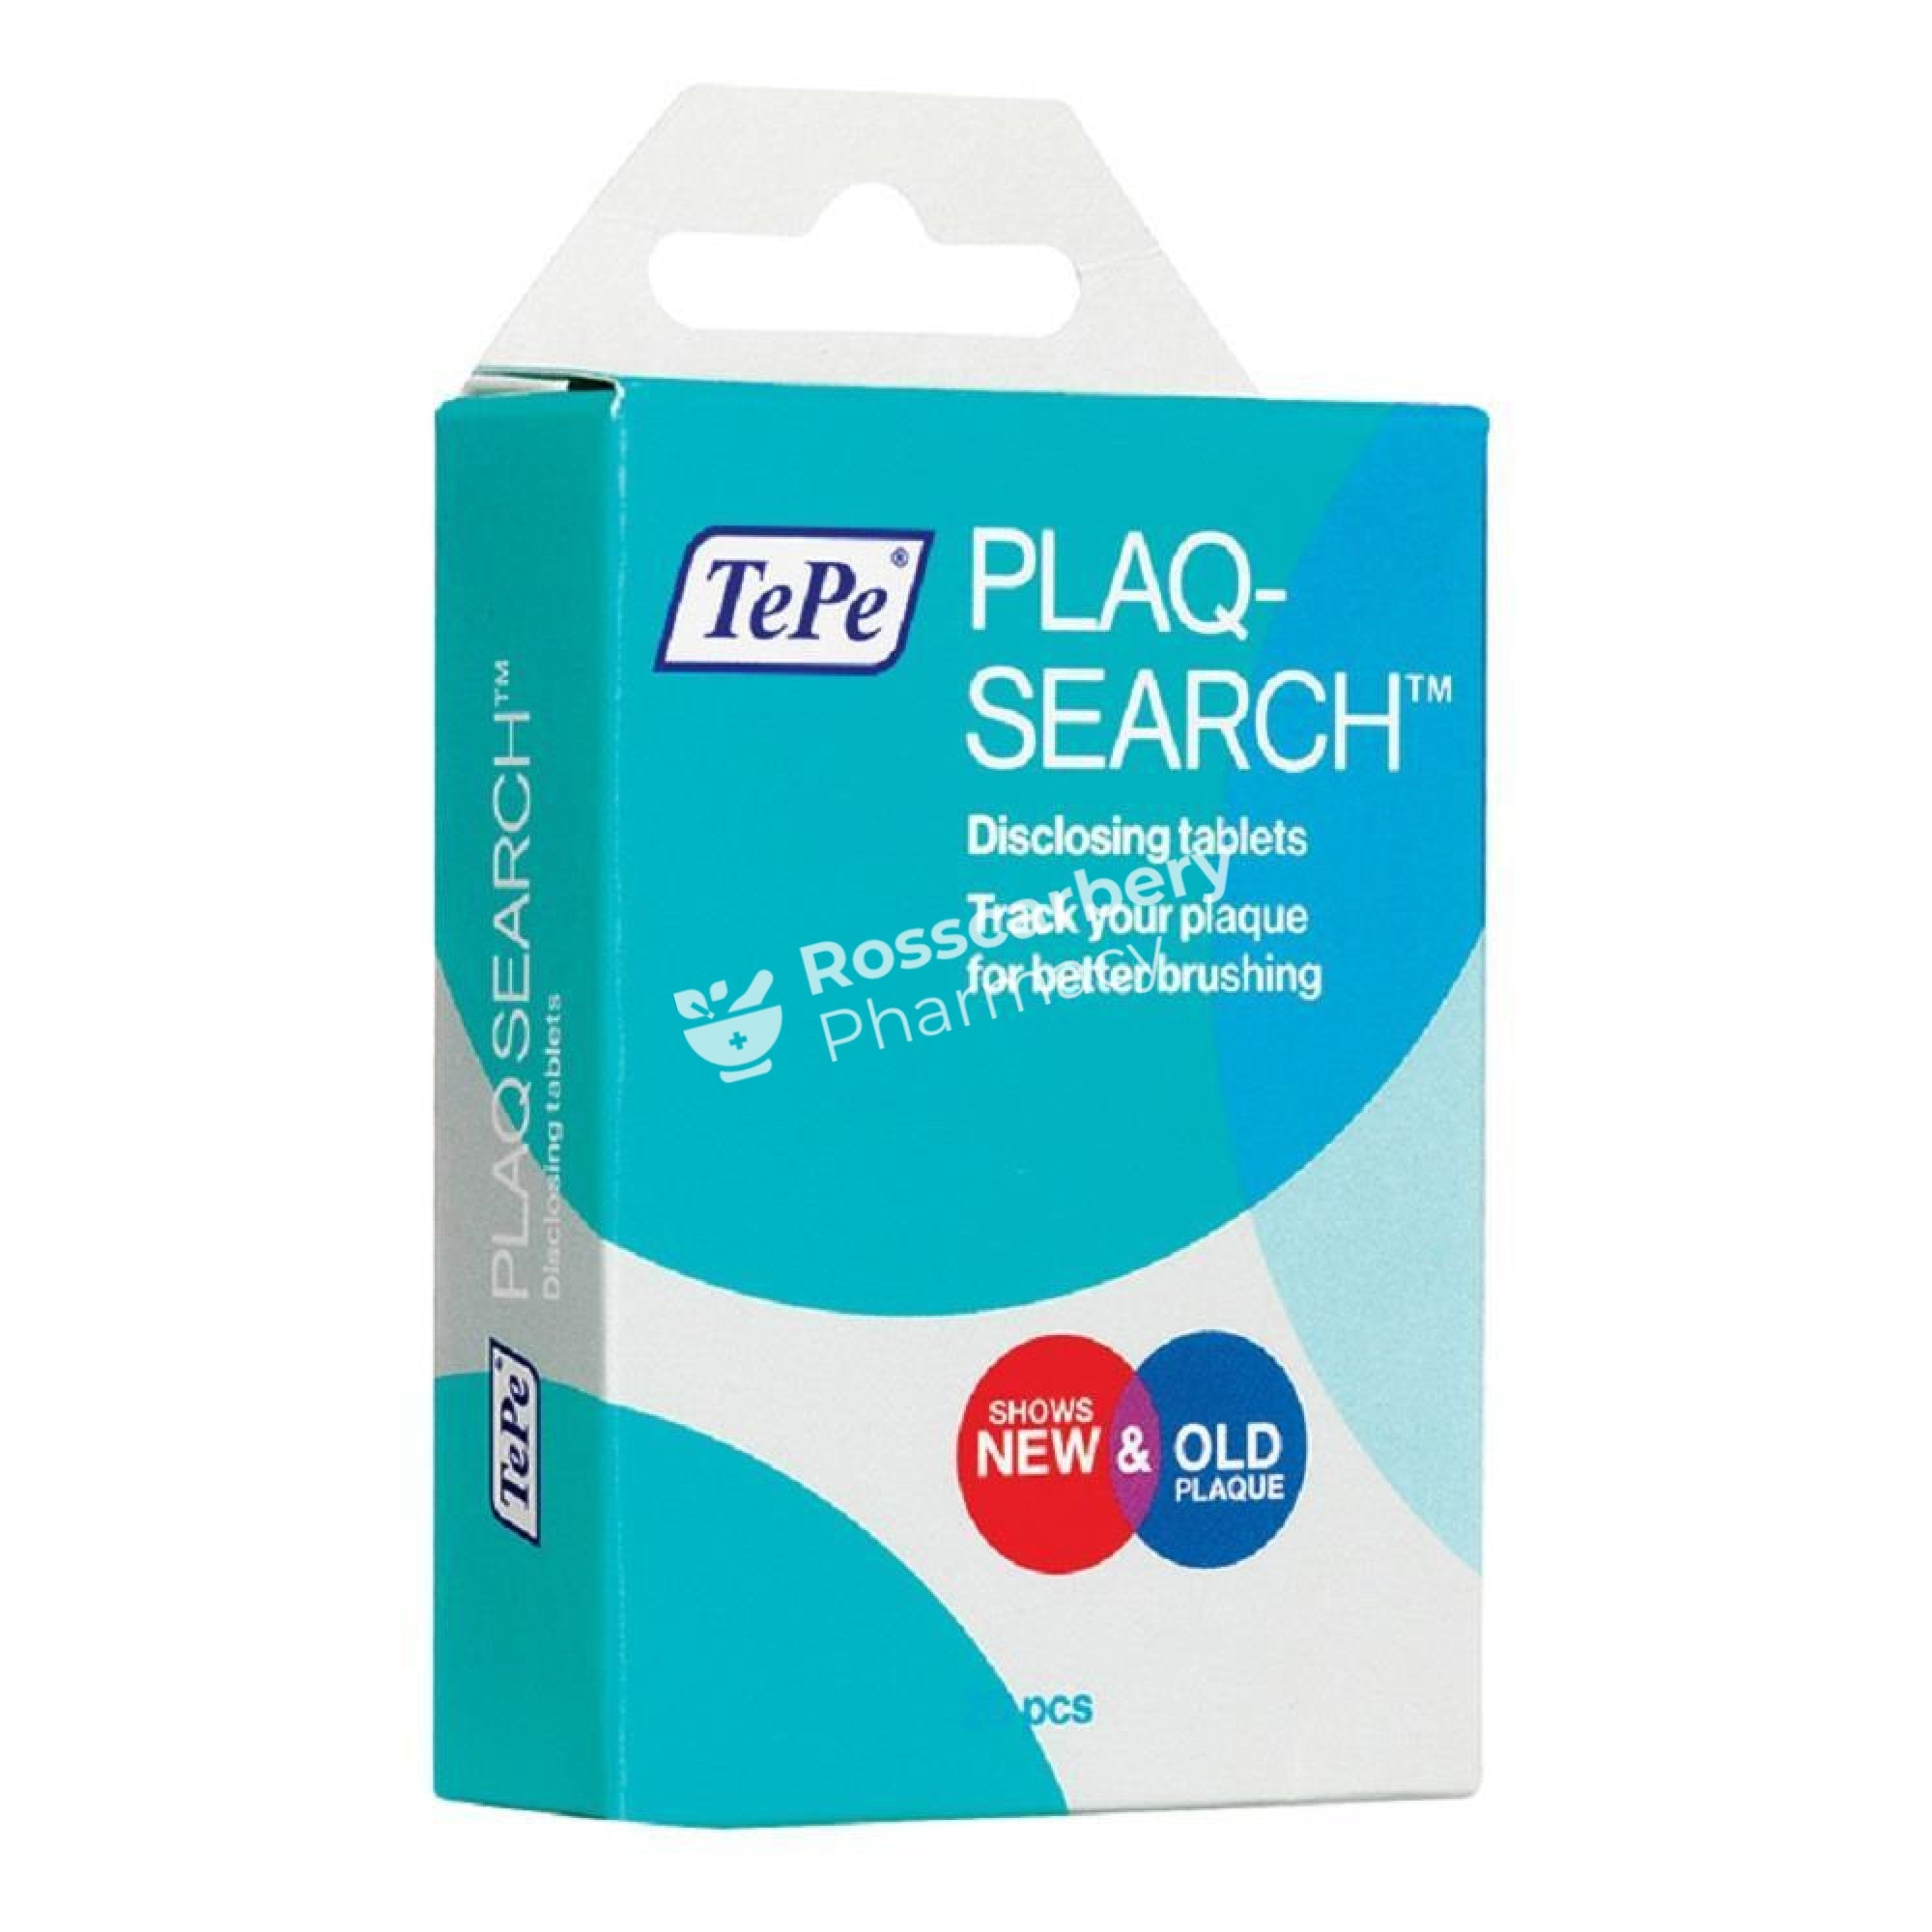 Tepe Plaqsearch/ Plaque Disclosing Tablets Oral Care